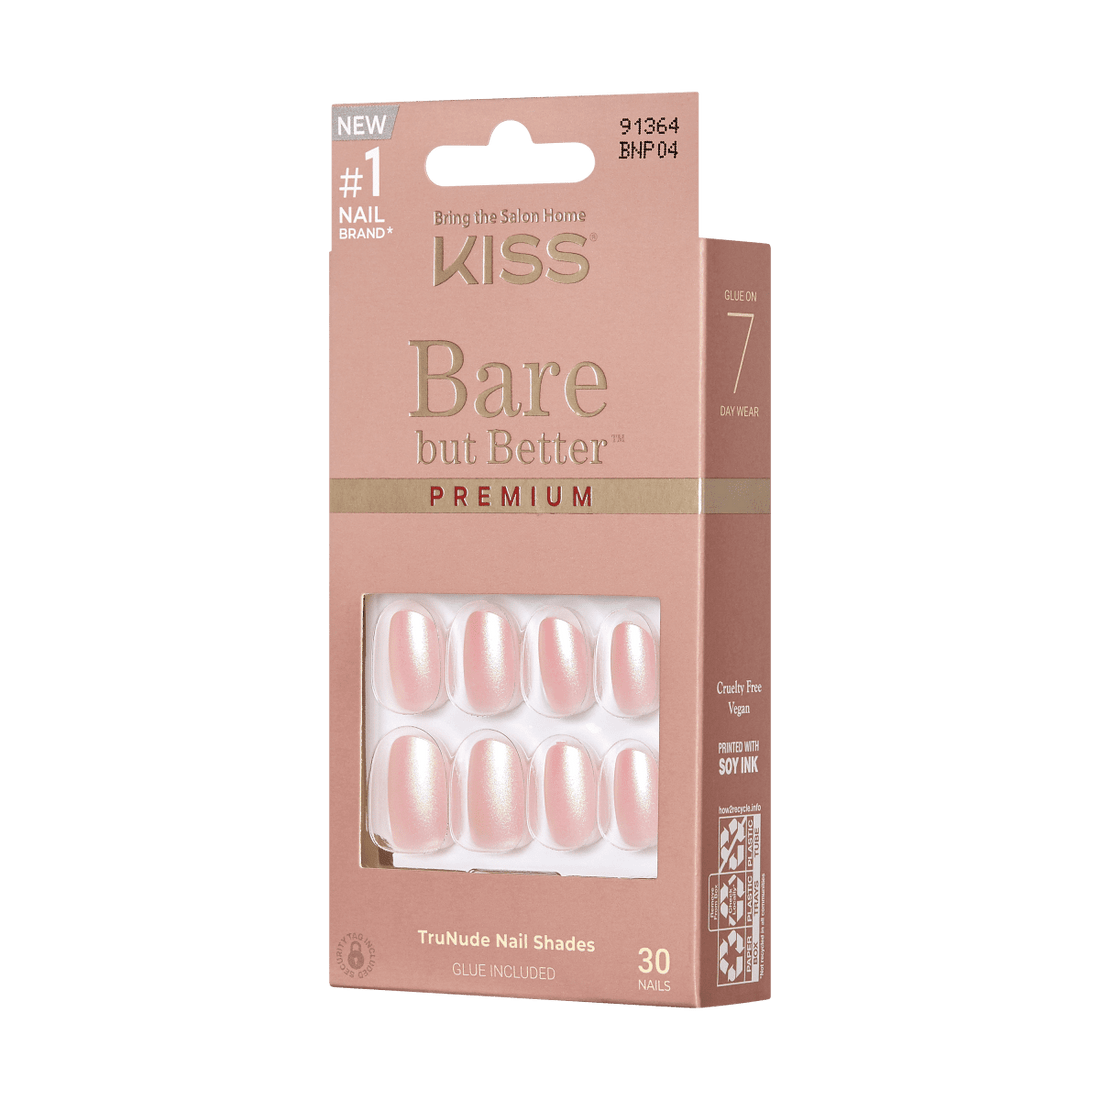 KISS Bare But Better, Press-On Nails, Mocha, Beige, Short Oval, 30ct